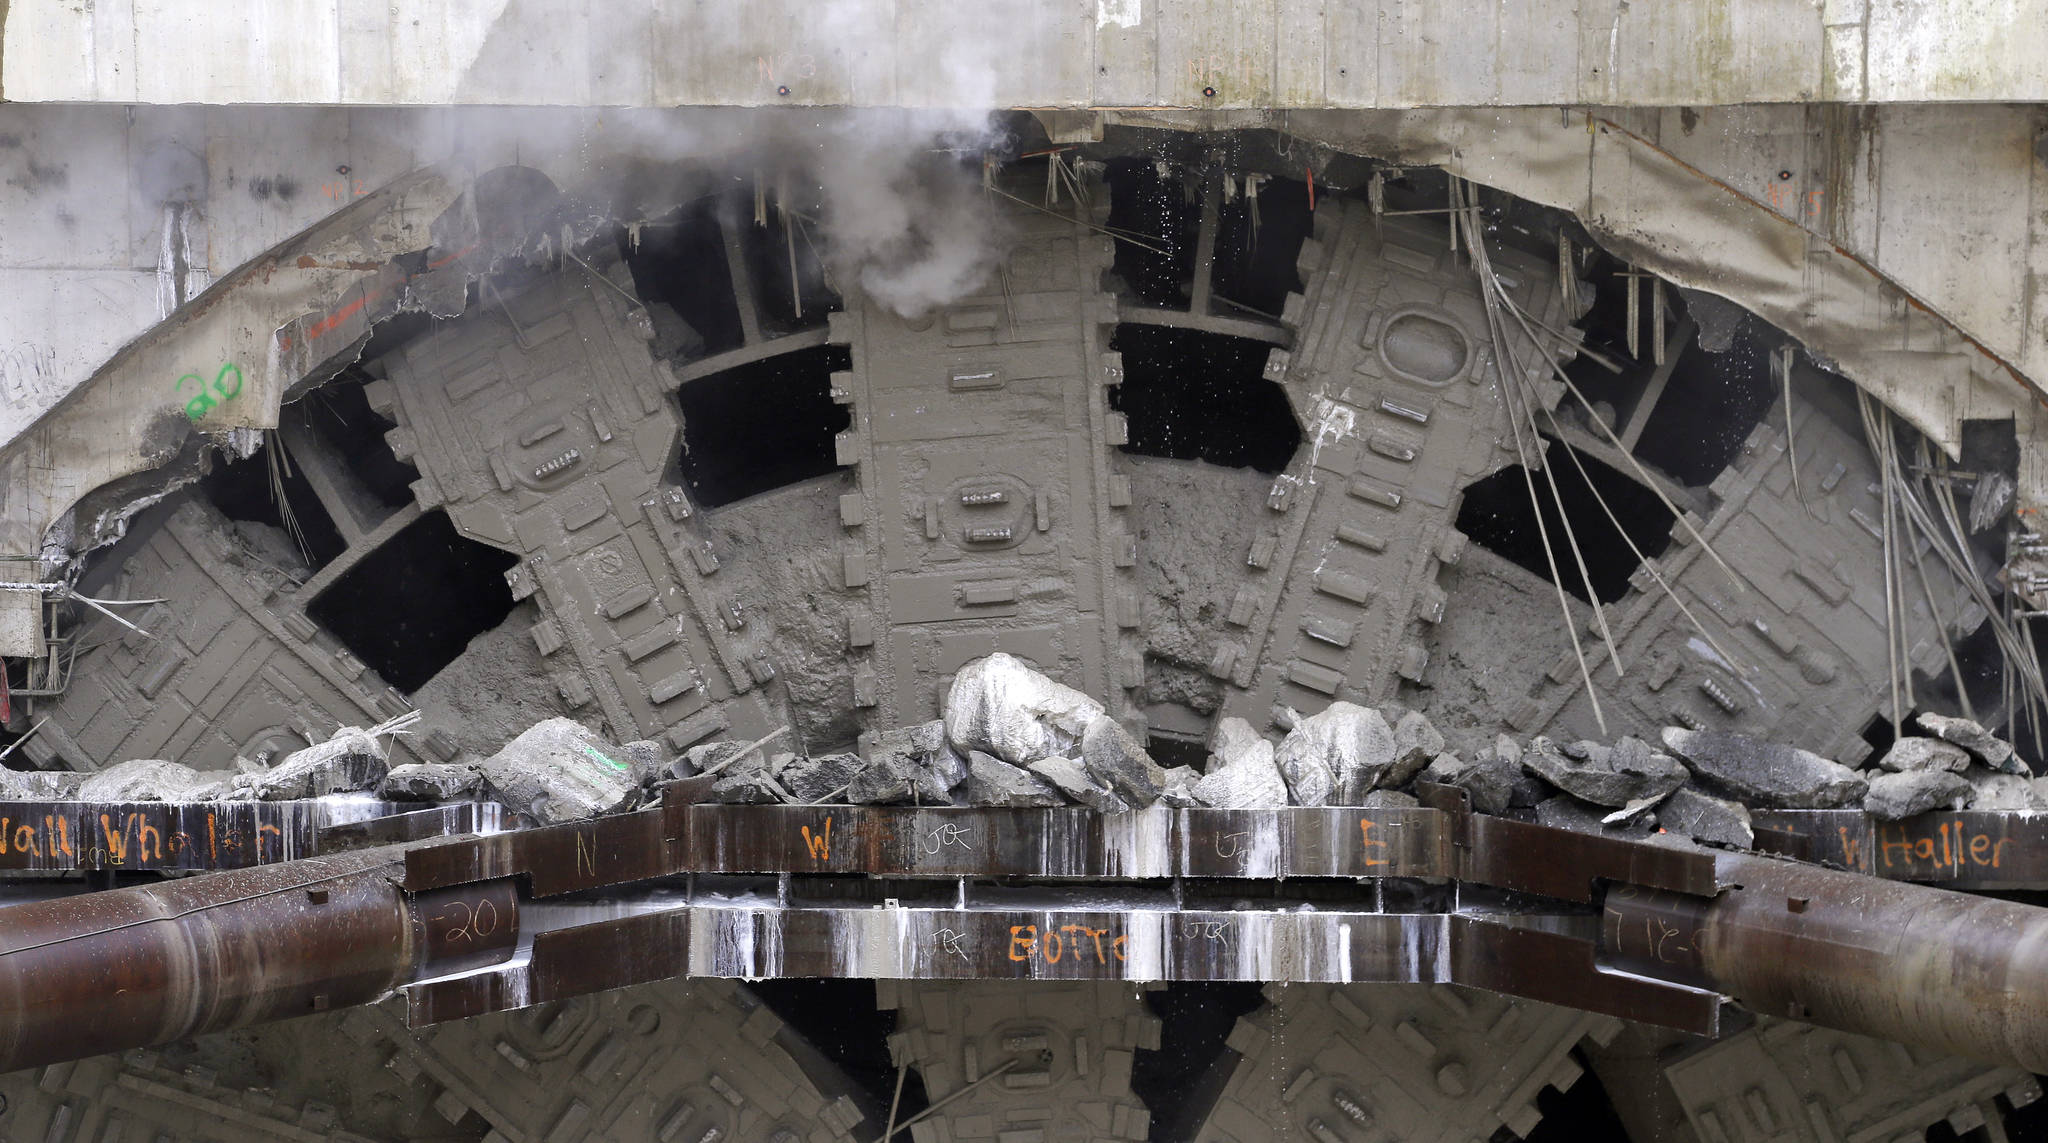 Debris sits atop bracing that had been holding a 5-foot concrete wall as the cutter heads of a massive tunneling machine are fully visible as it completes boring for the state Highway 99 route under Seattle. (Elaine Thompson/The Associated Press)